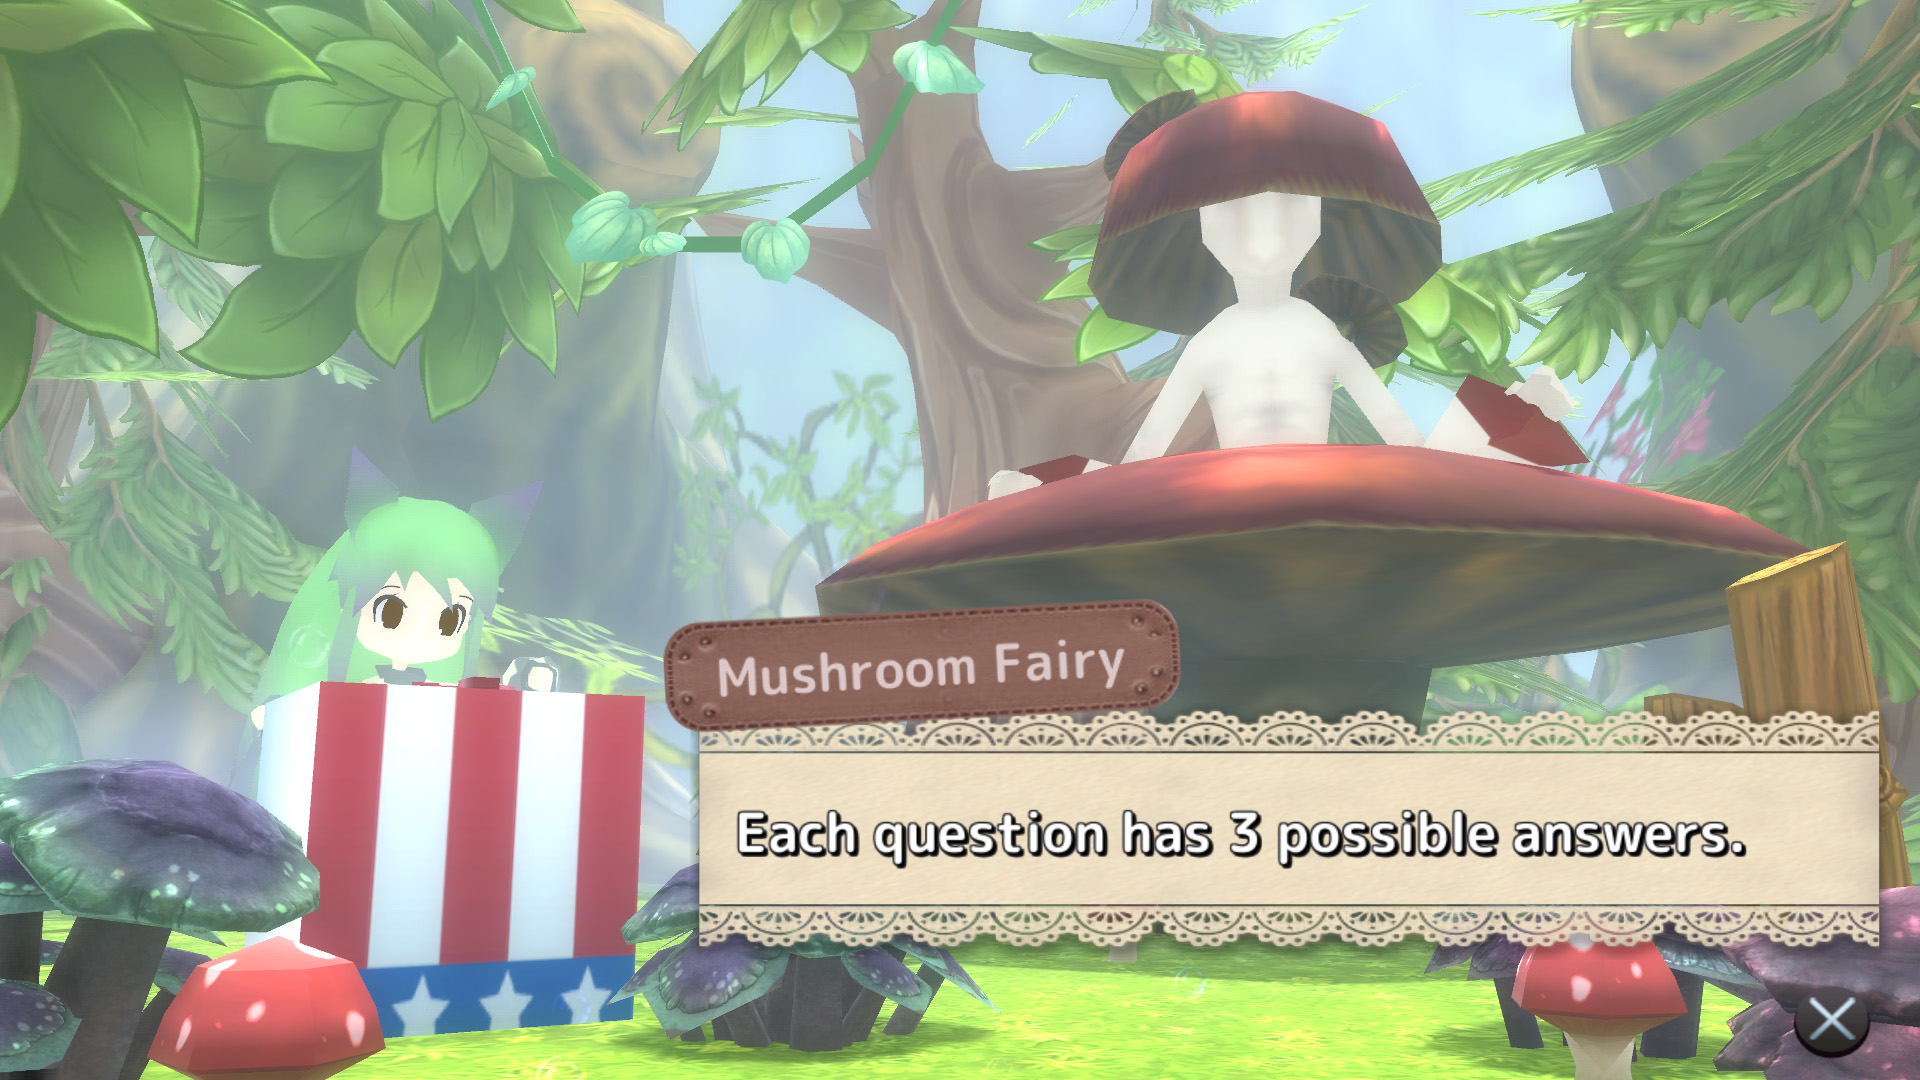 Märchen Forest: Mylne and the Forest Gift [Legacy ver.] screenshot